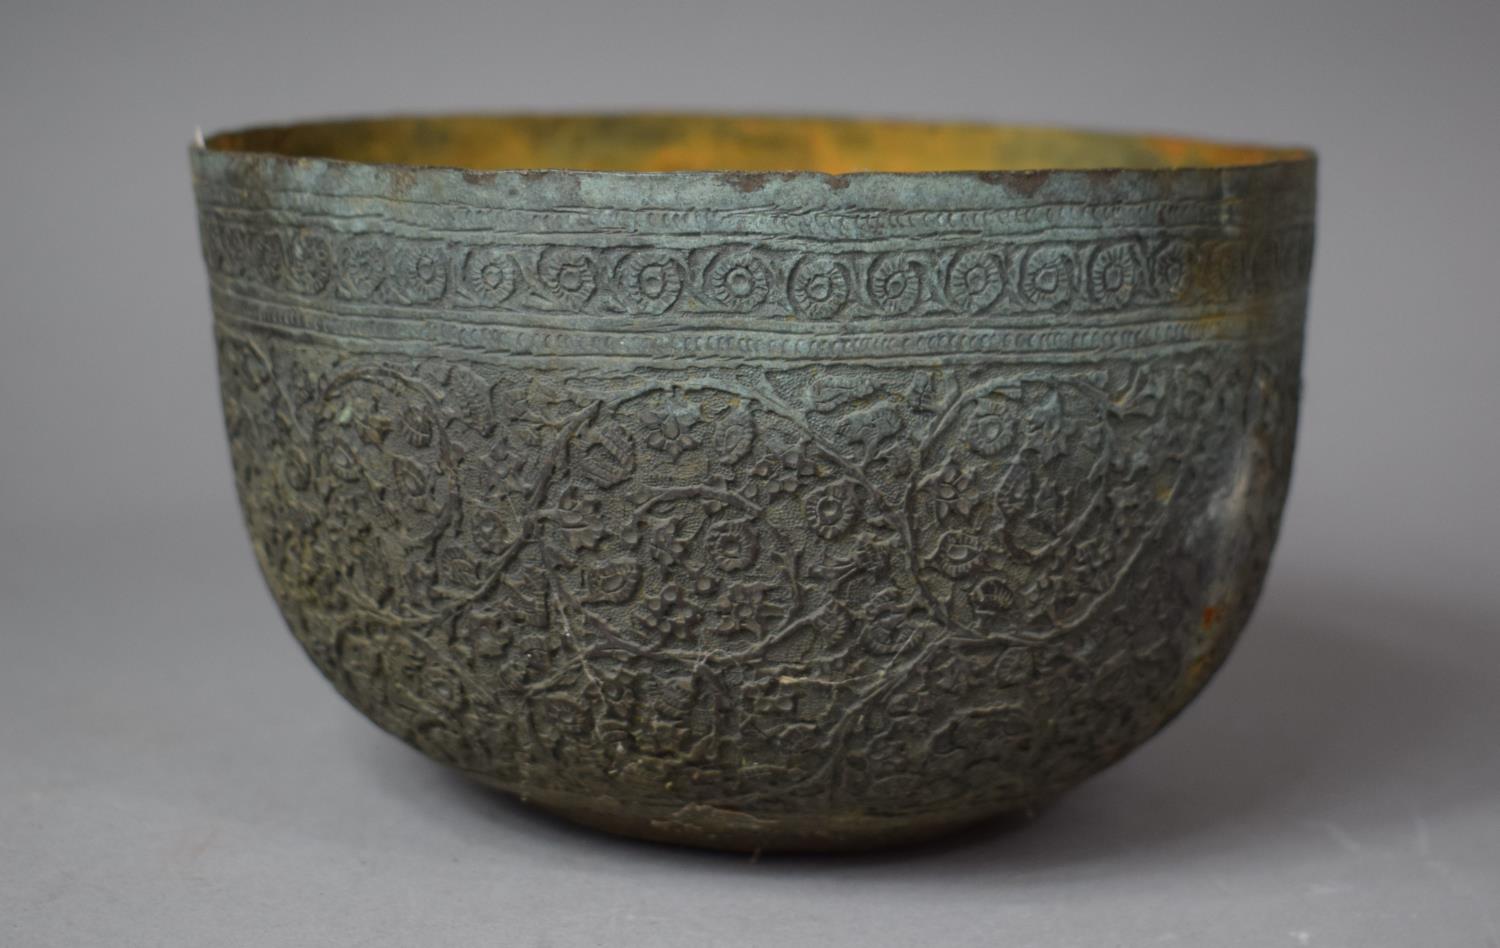 A Far Eastern Intricately Etched White Metal Bowl with Verdigris Finish, Decorated in Relief with